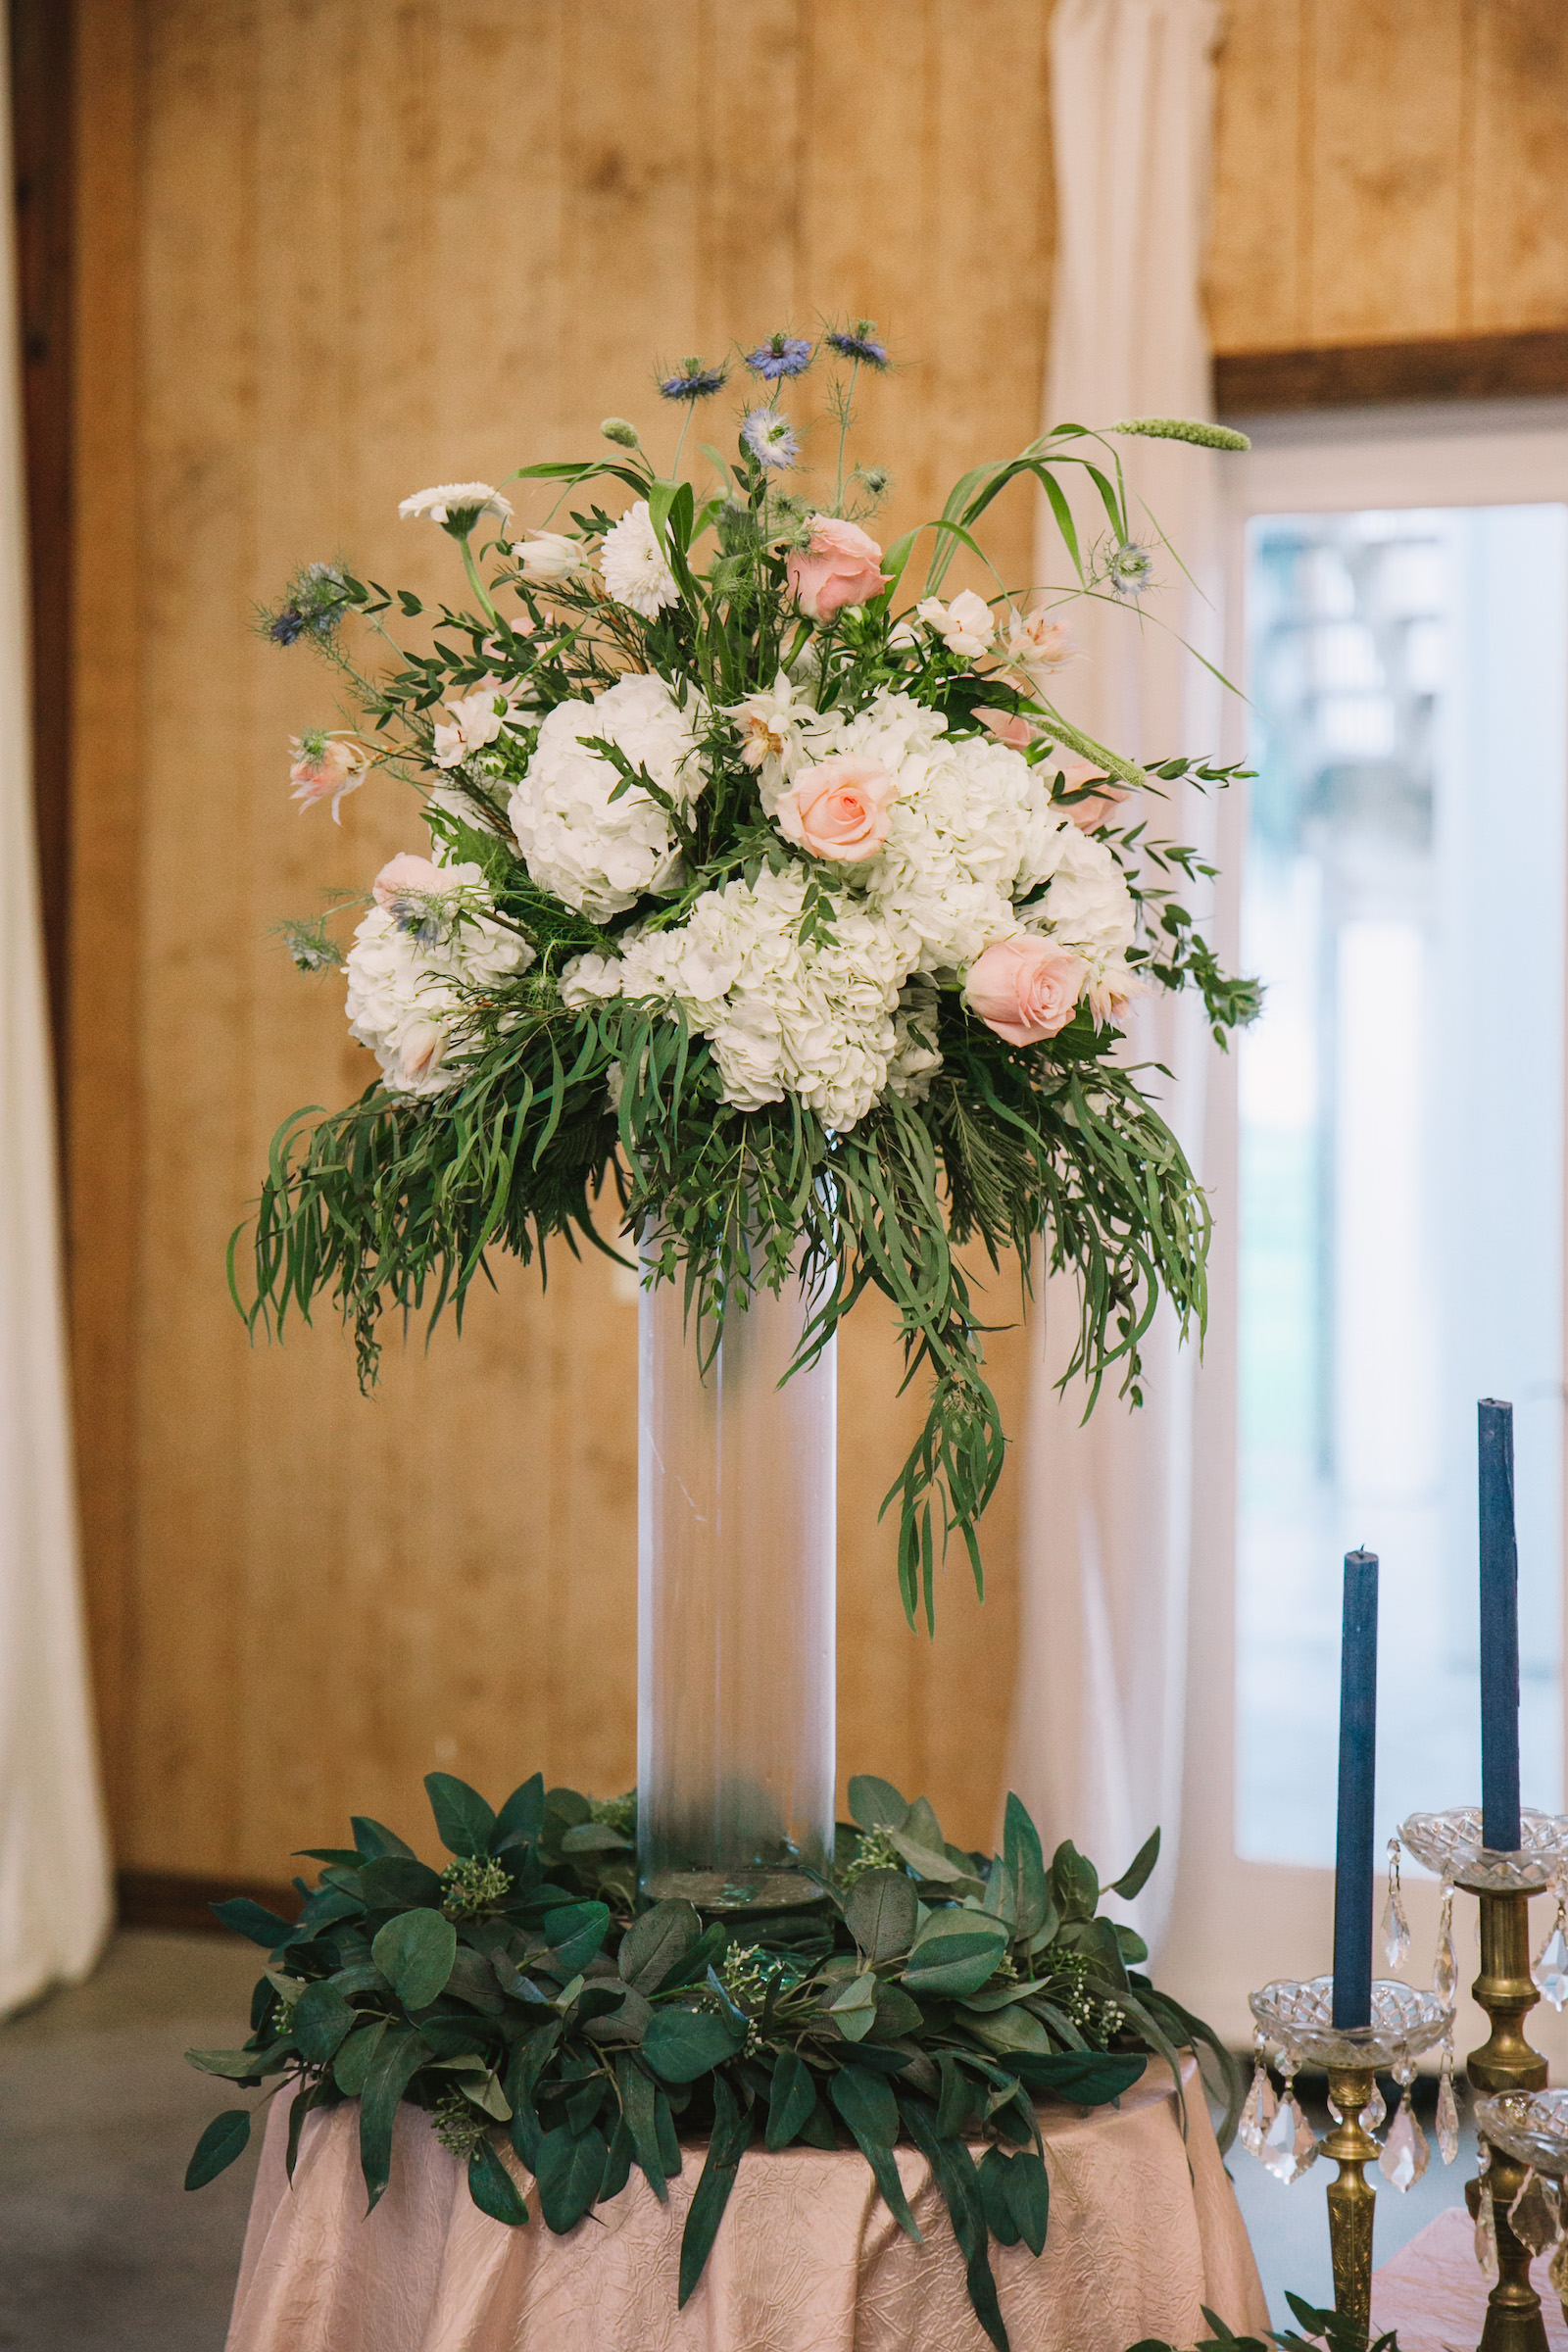 Tall Blush and White Floral Centerpieces with Greenery and Navy Candles